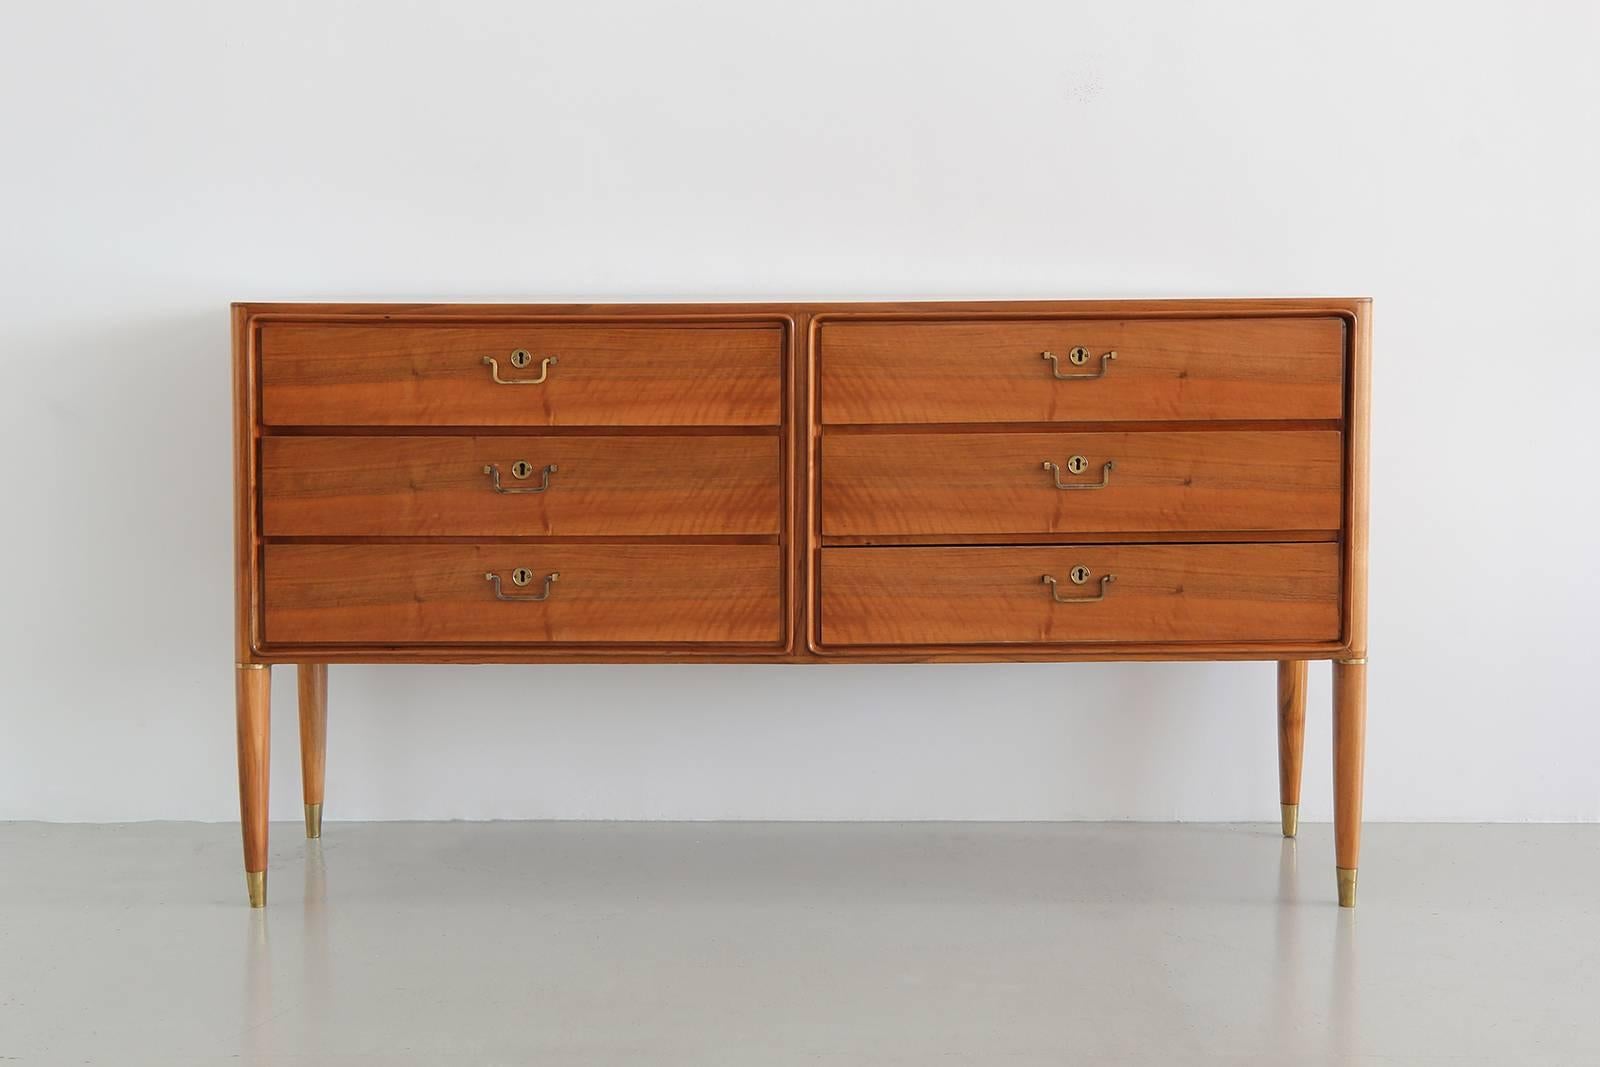 Six-drawer dresser in satin walnut each with original hardware and lockable capabilities. Incredibly restored to original excellent condition.